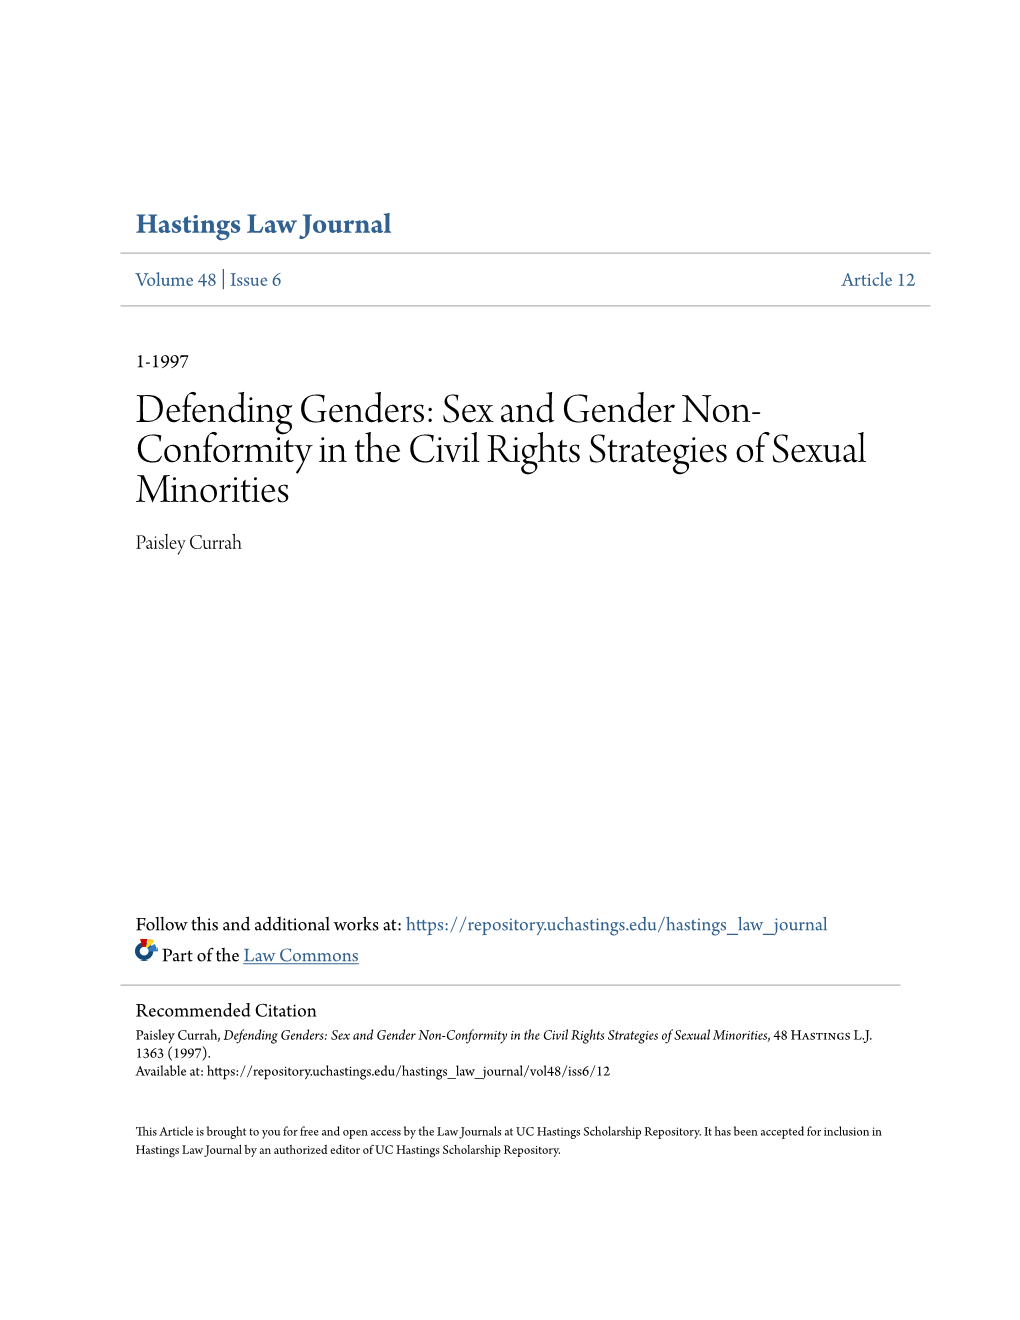 Sex and Gender Non-Conformity in the Civil Rights Strategies of Sexual Minorities, 48 Hastings L.J